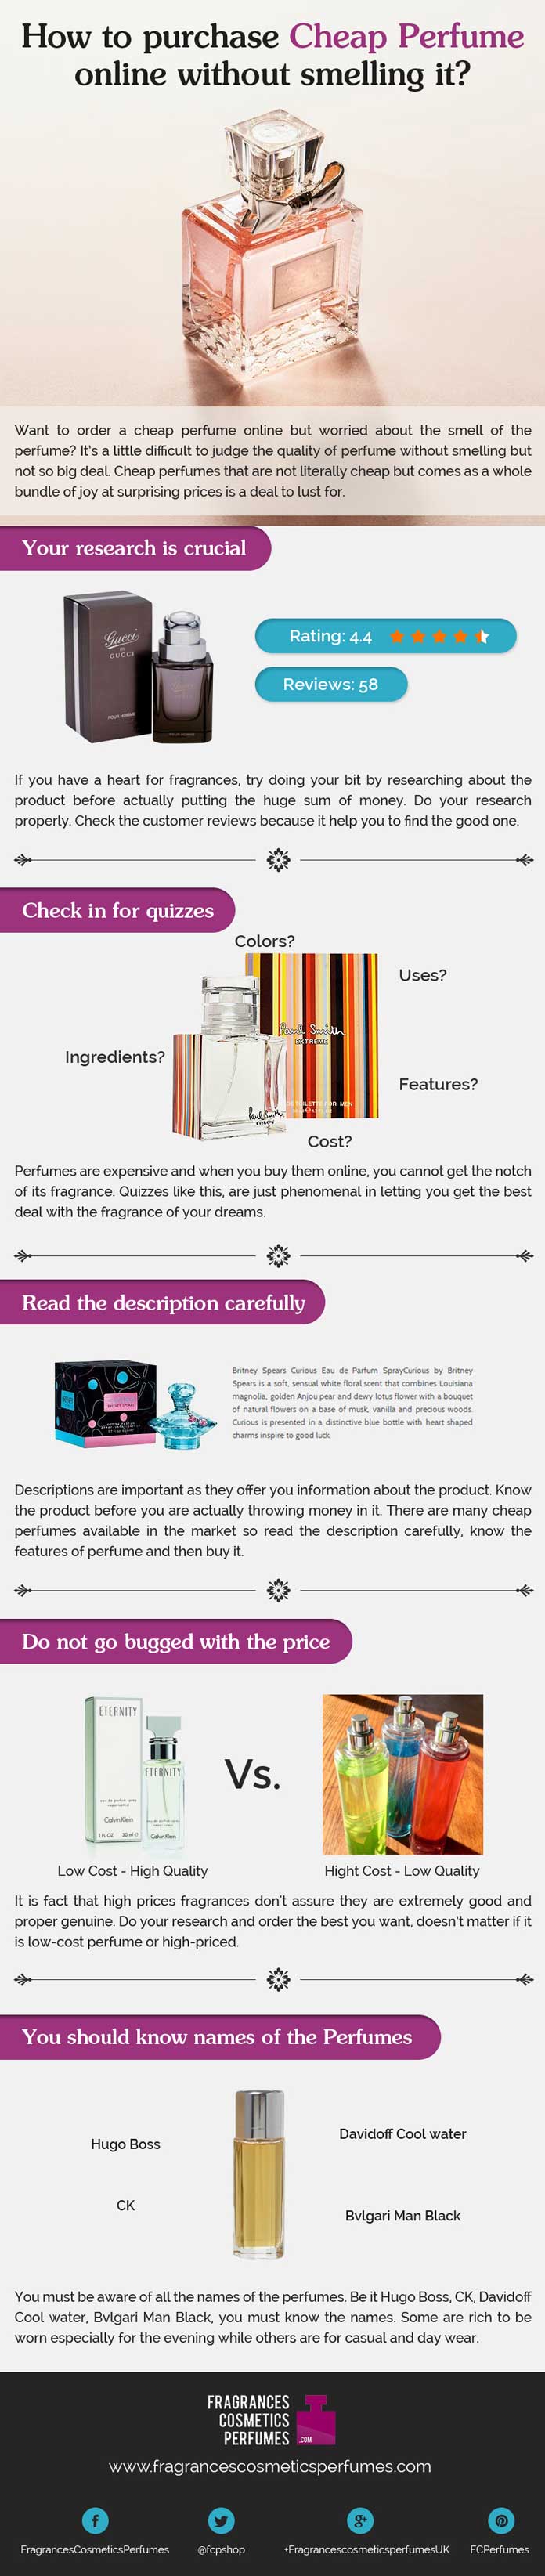 How to purchase Cheap Perfume online without smelling it? [Infographic]